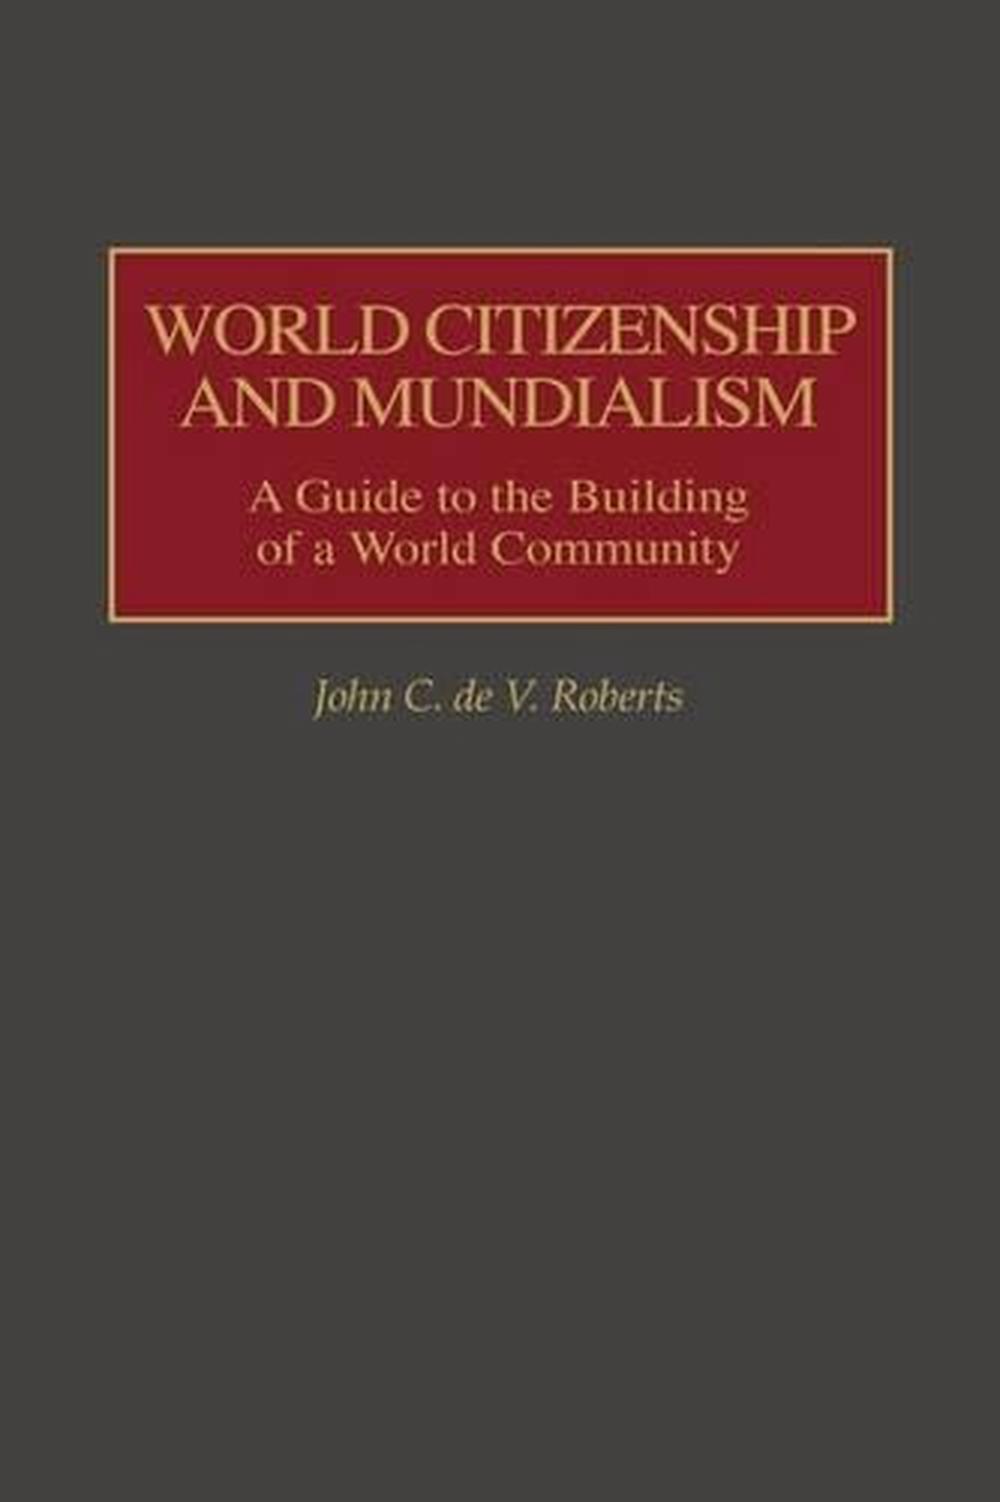 Citizen of the World by John English